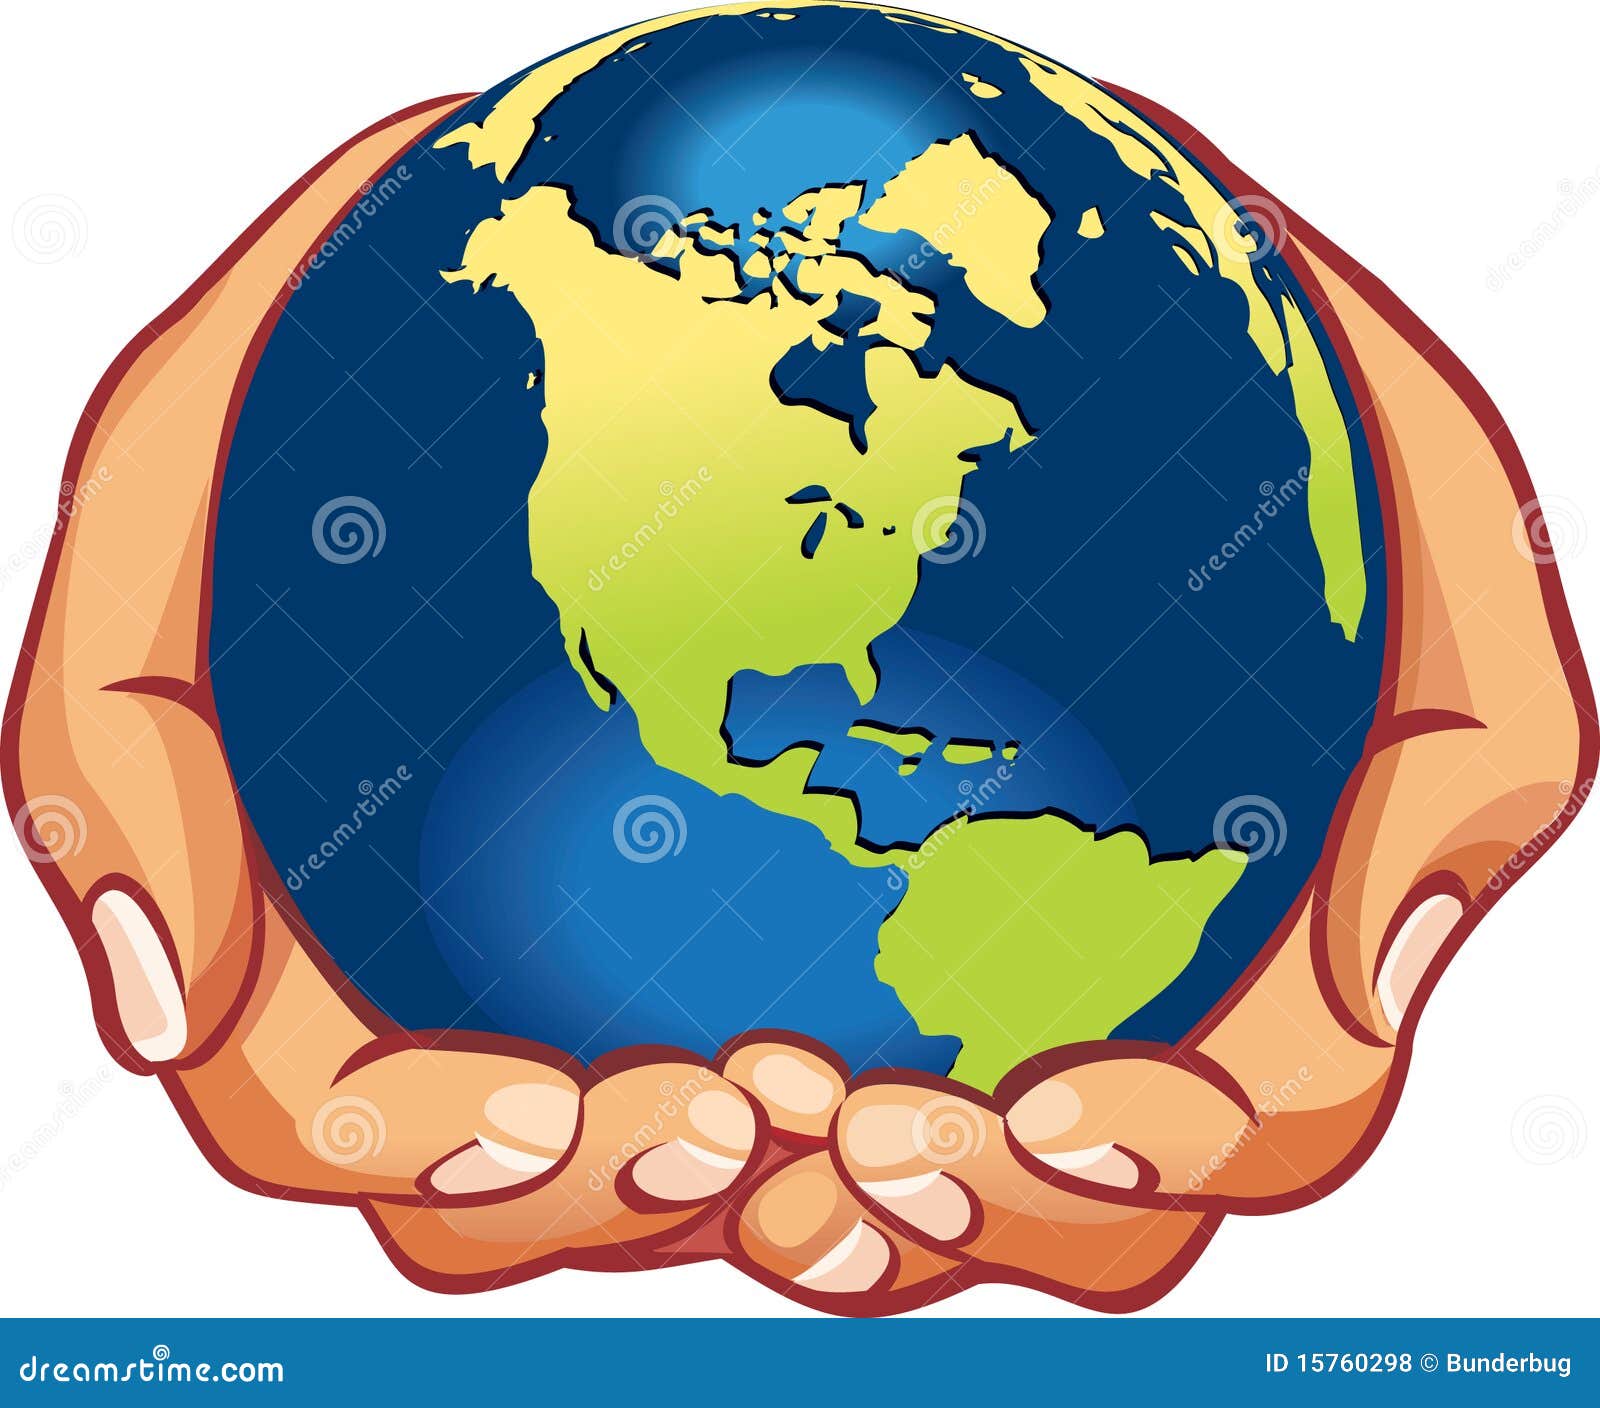 clipart globe with hands - photo #39